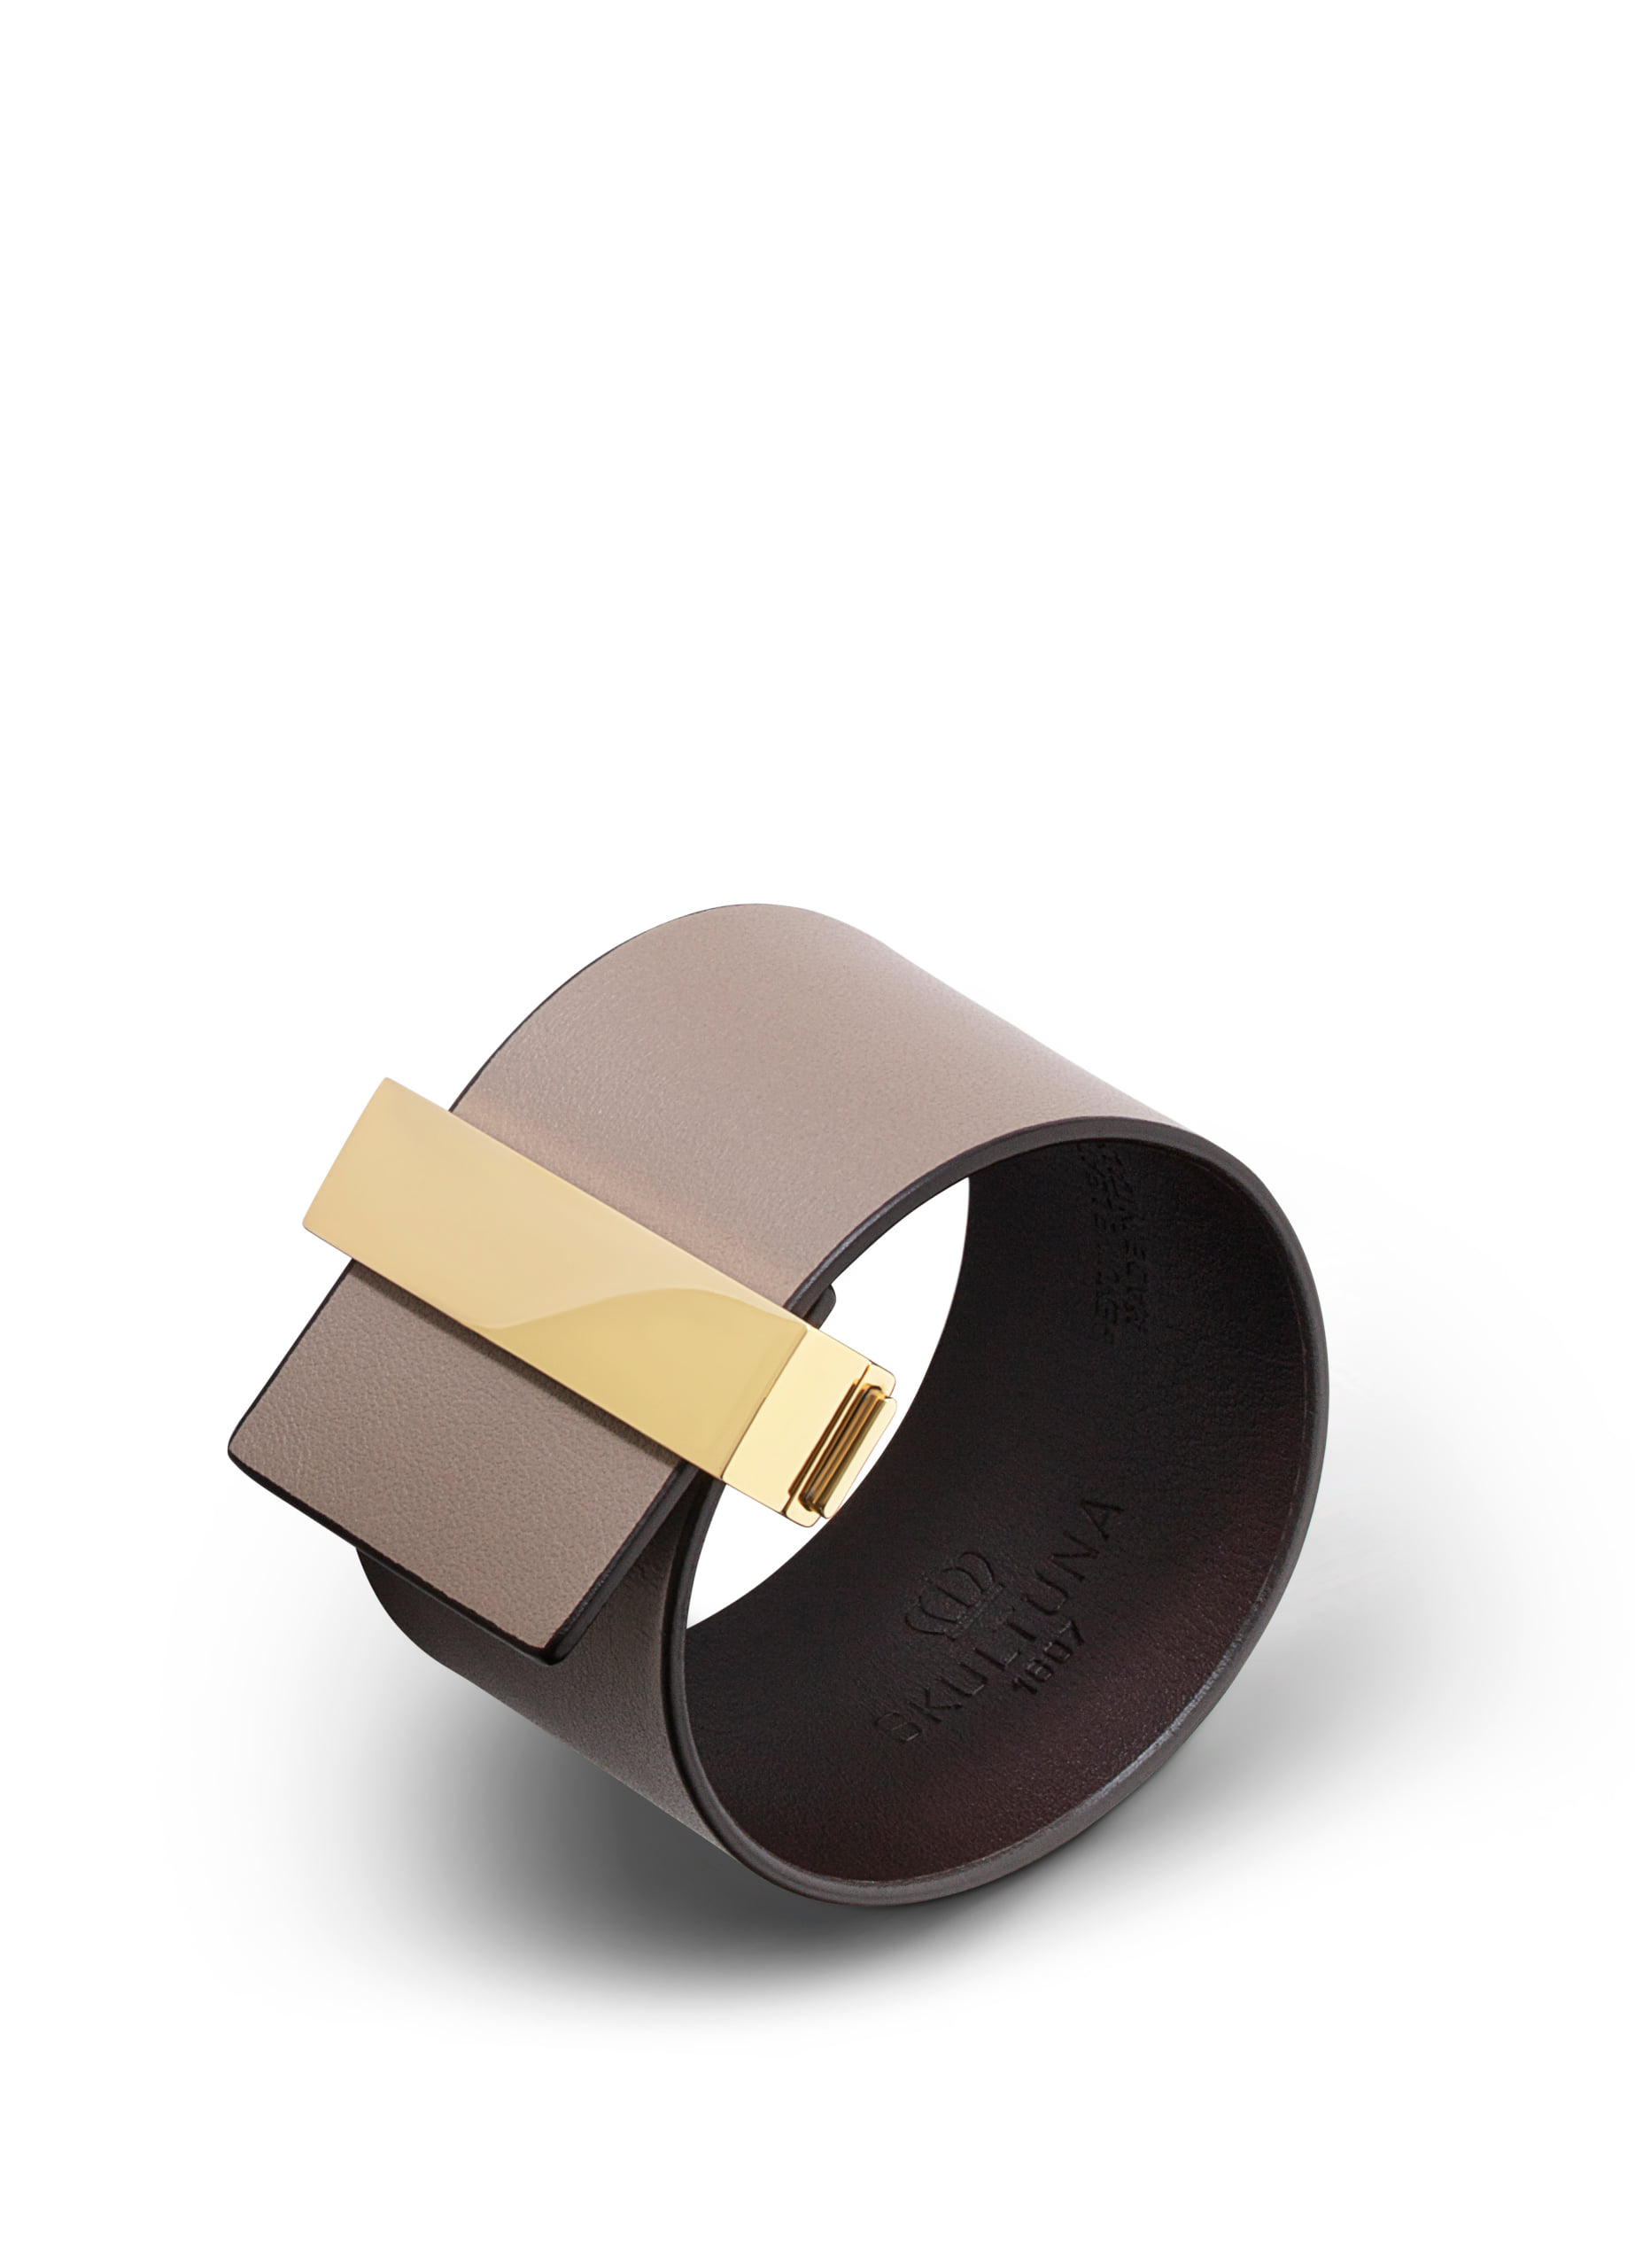 Wide leather bracelet with lock - Grey brown with gold plated